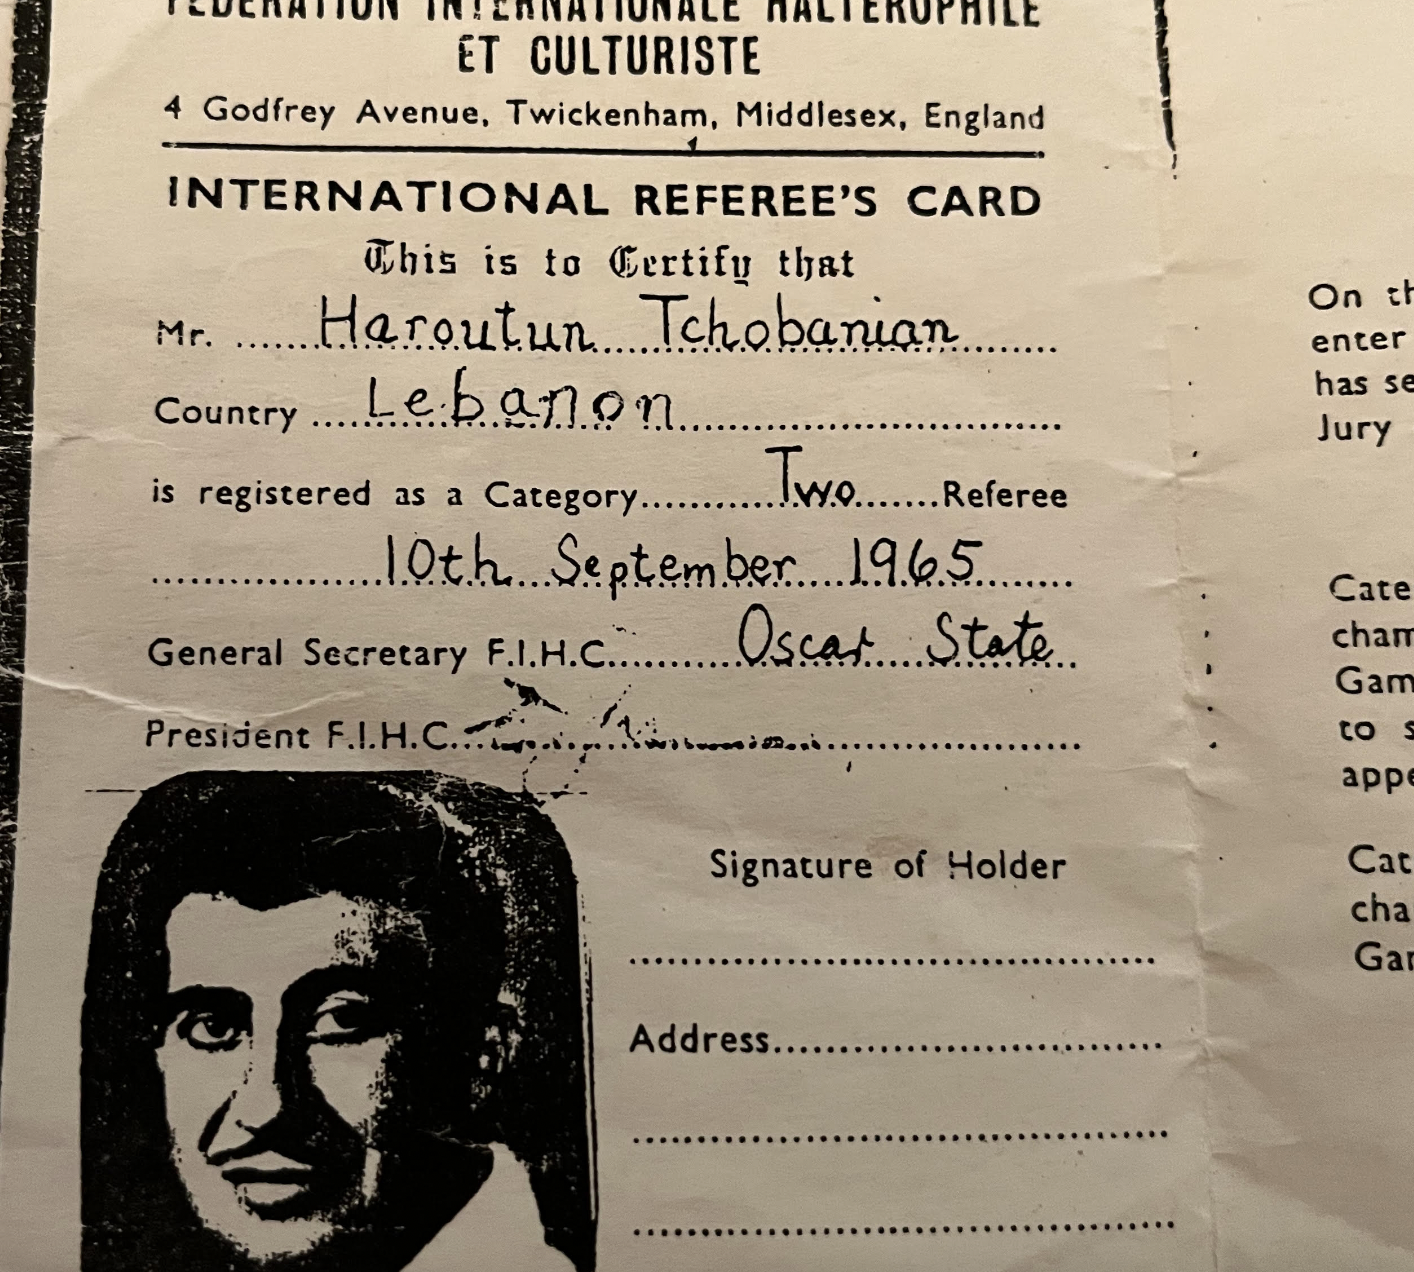 Harry Tchobanian's first International Referee Card, issued during the 1965 World Championships in Iran ©ITG